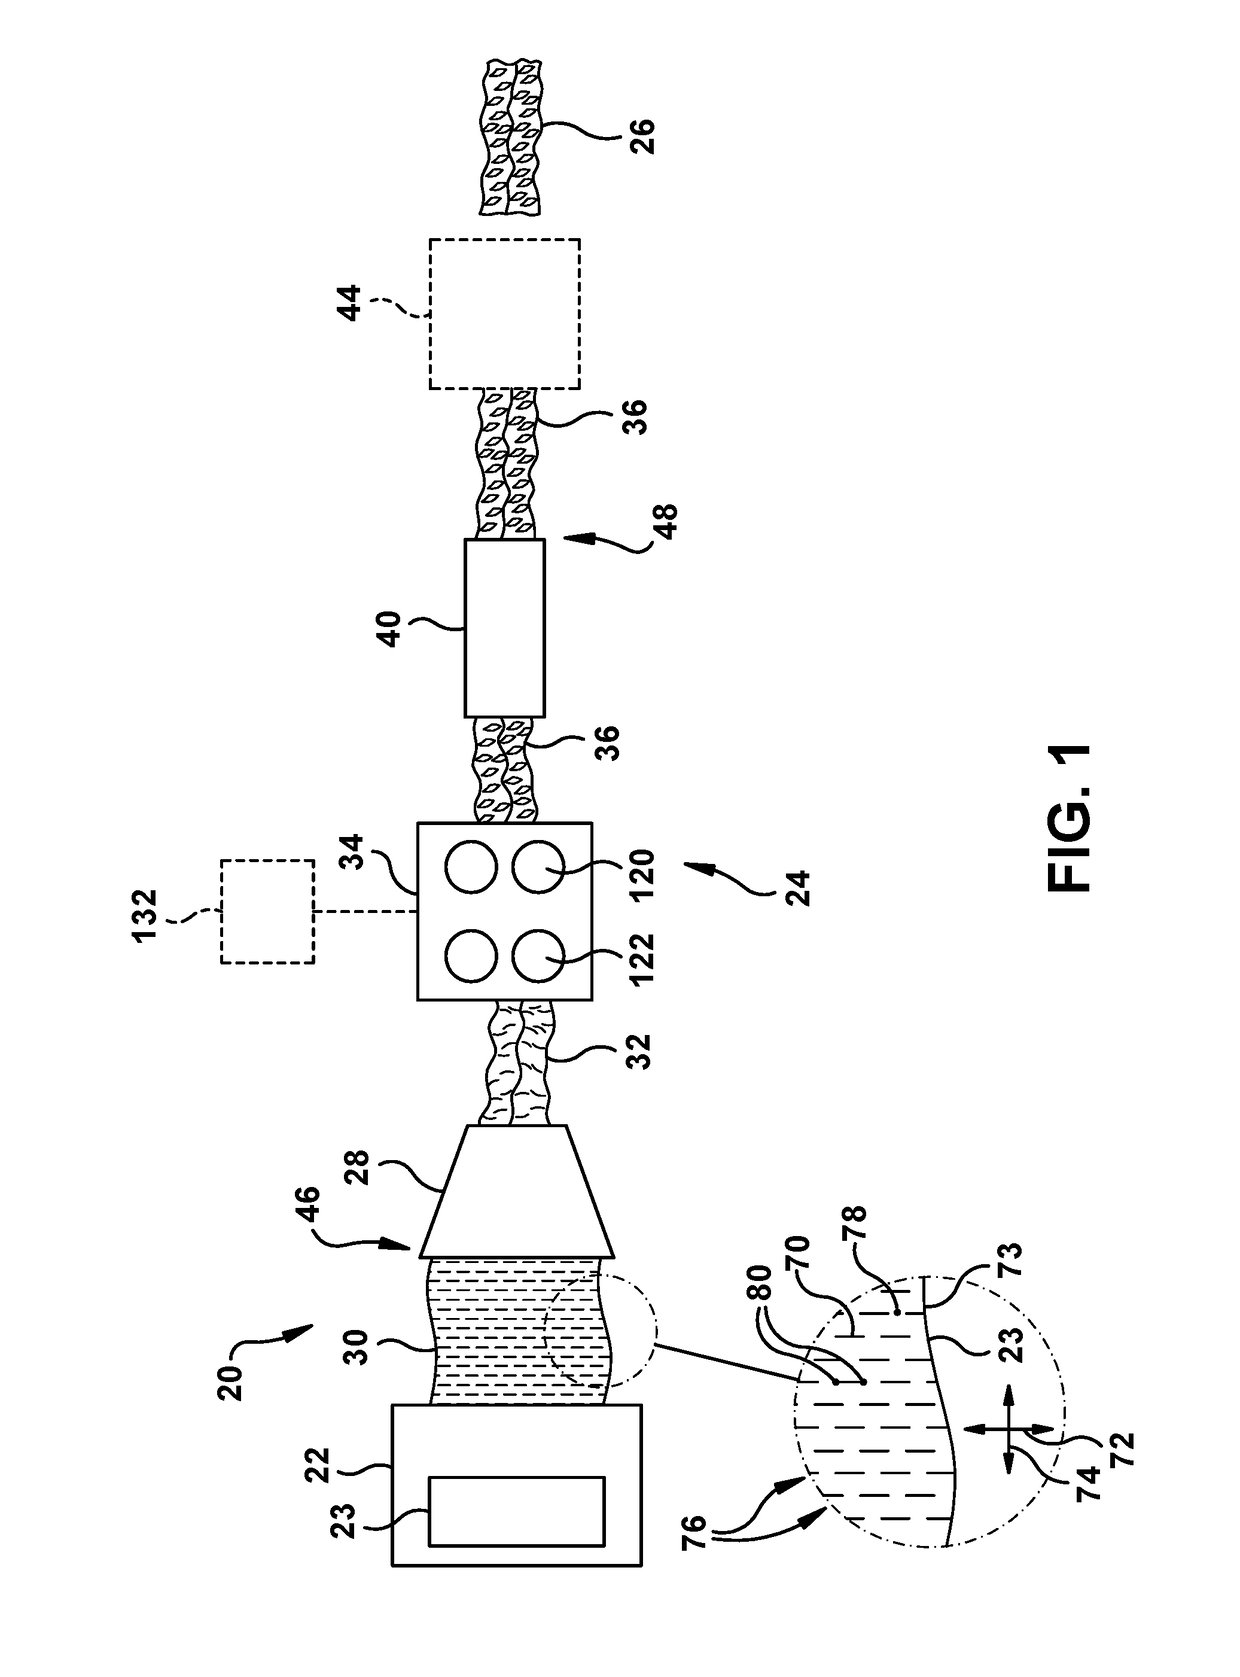 Dunnage conversion system and method for expanding pre-slit sheet stock material